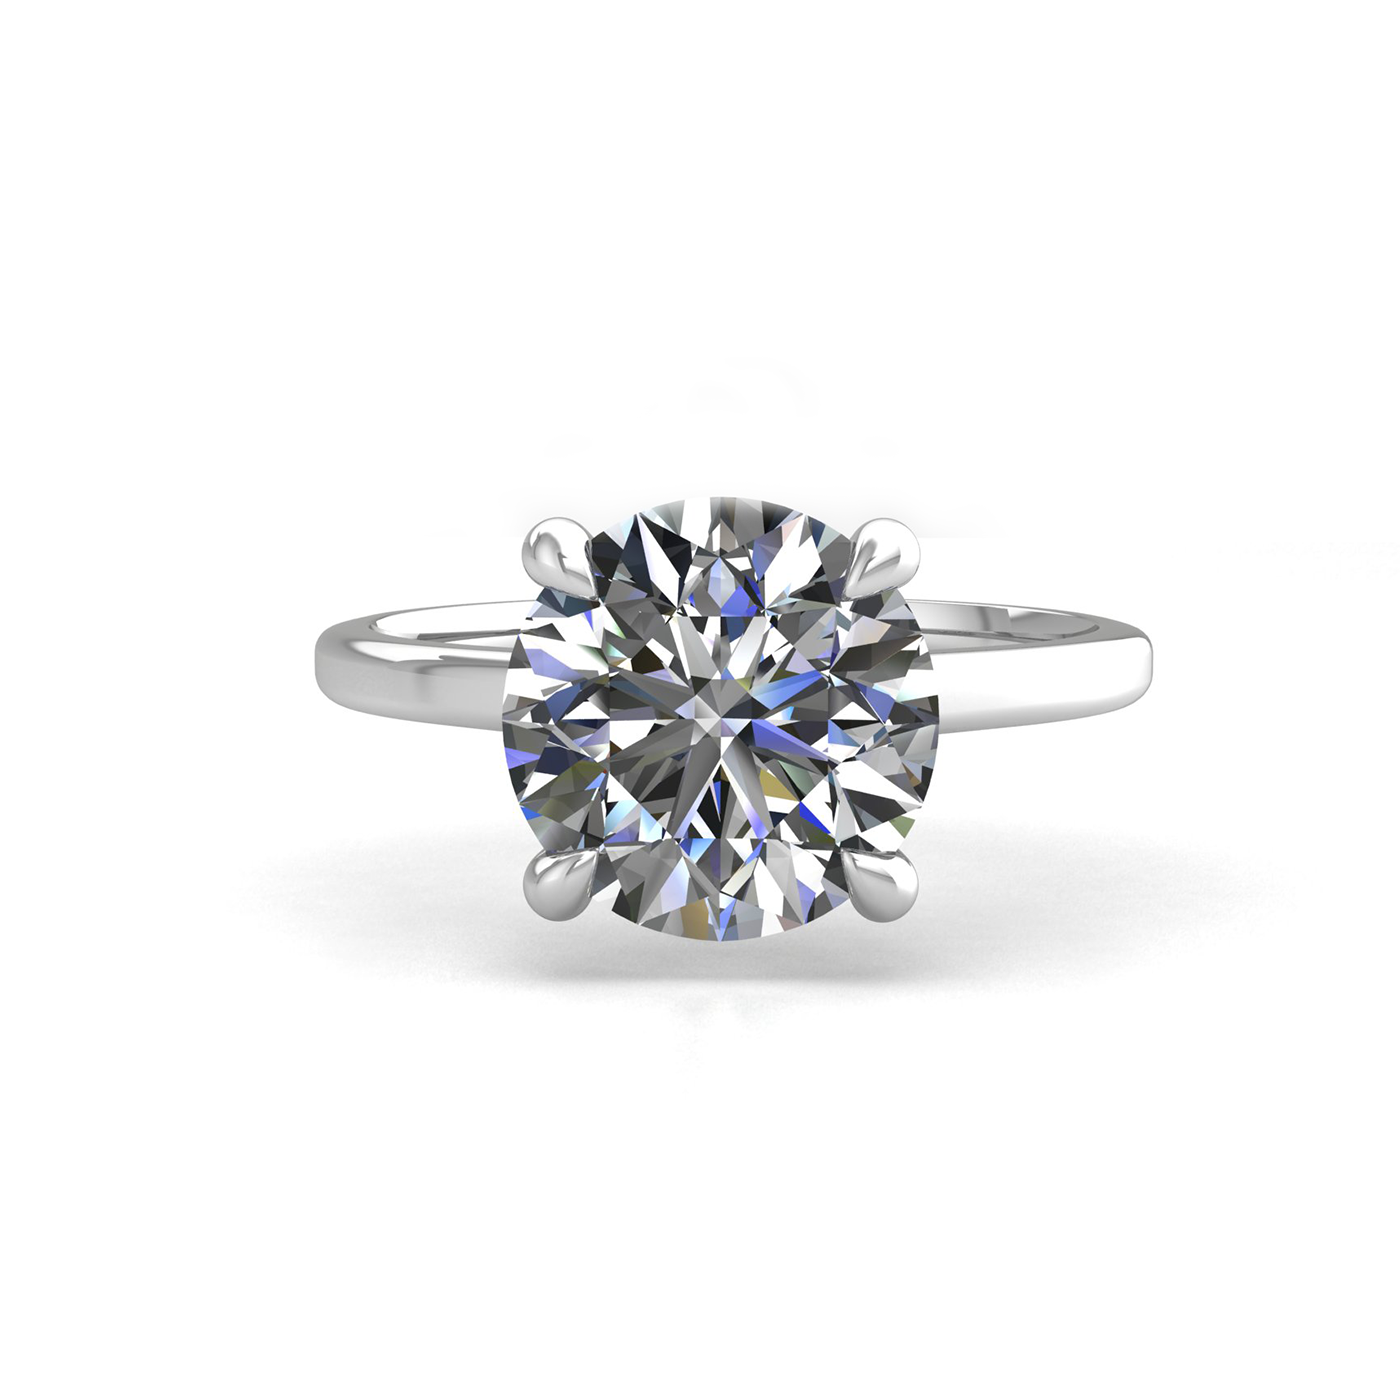 18k white gold 2,50 ct 4 prongs solitaire round cut diamond engagement ring with whisper thin band